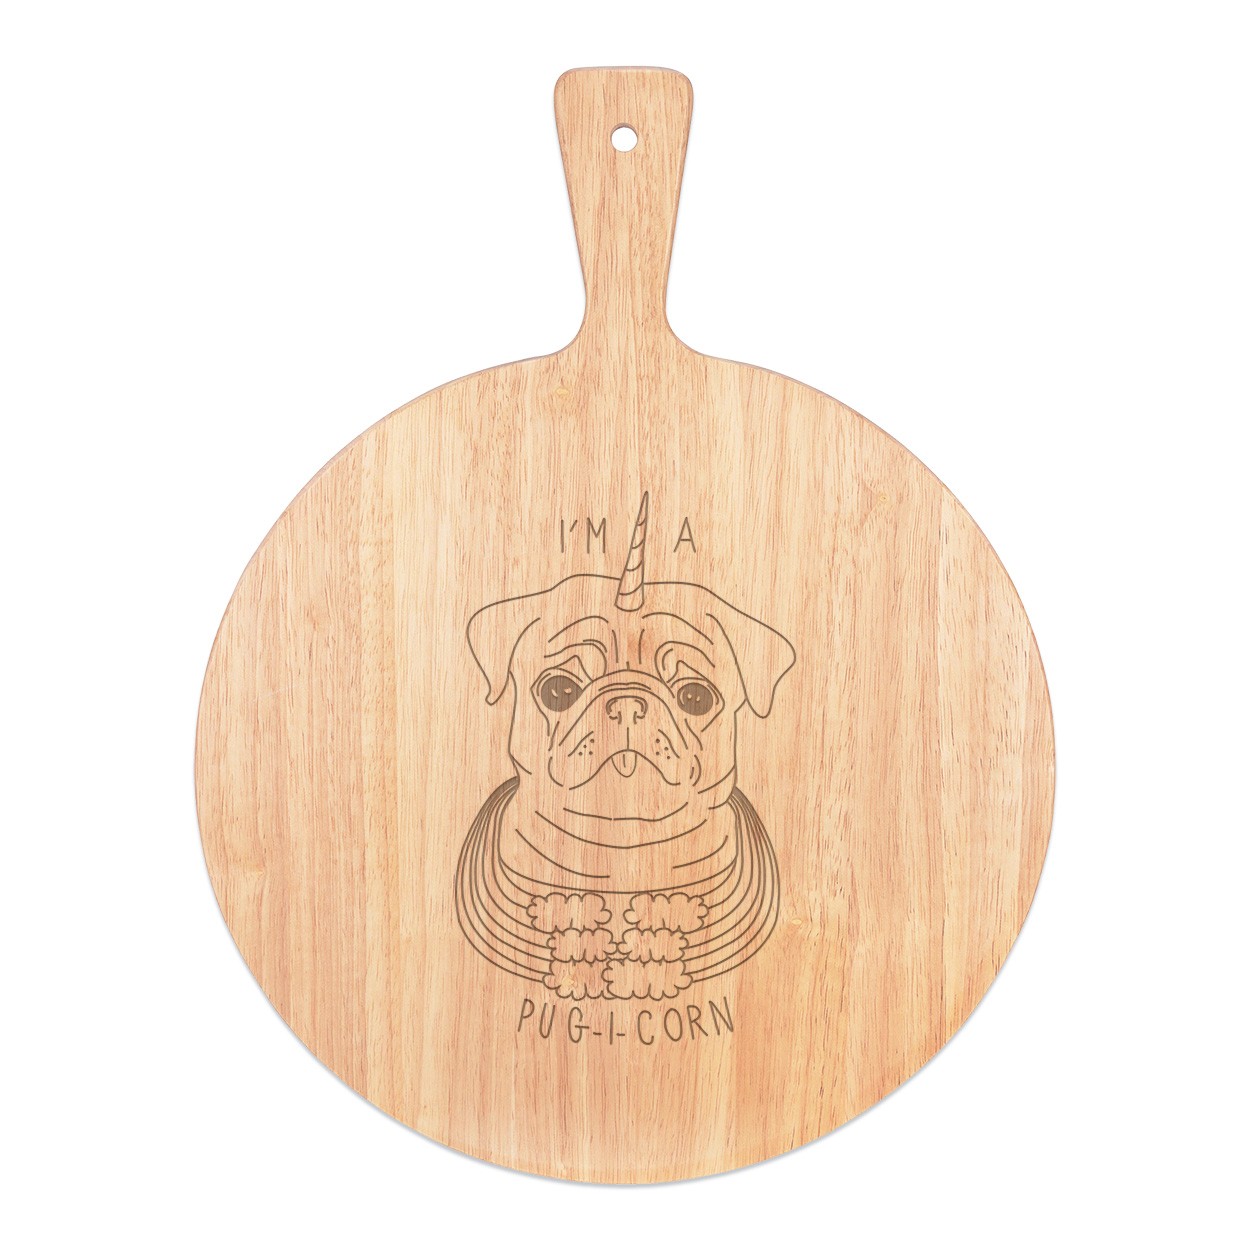 I'm A Pugicorn Rainbow Pizza Board Paddle Serving Tray Handle Round Wooden 45x34cm